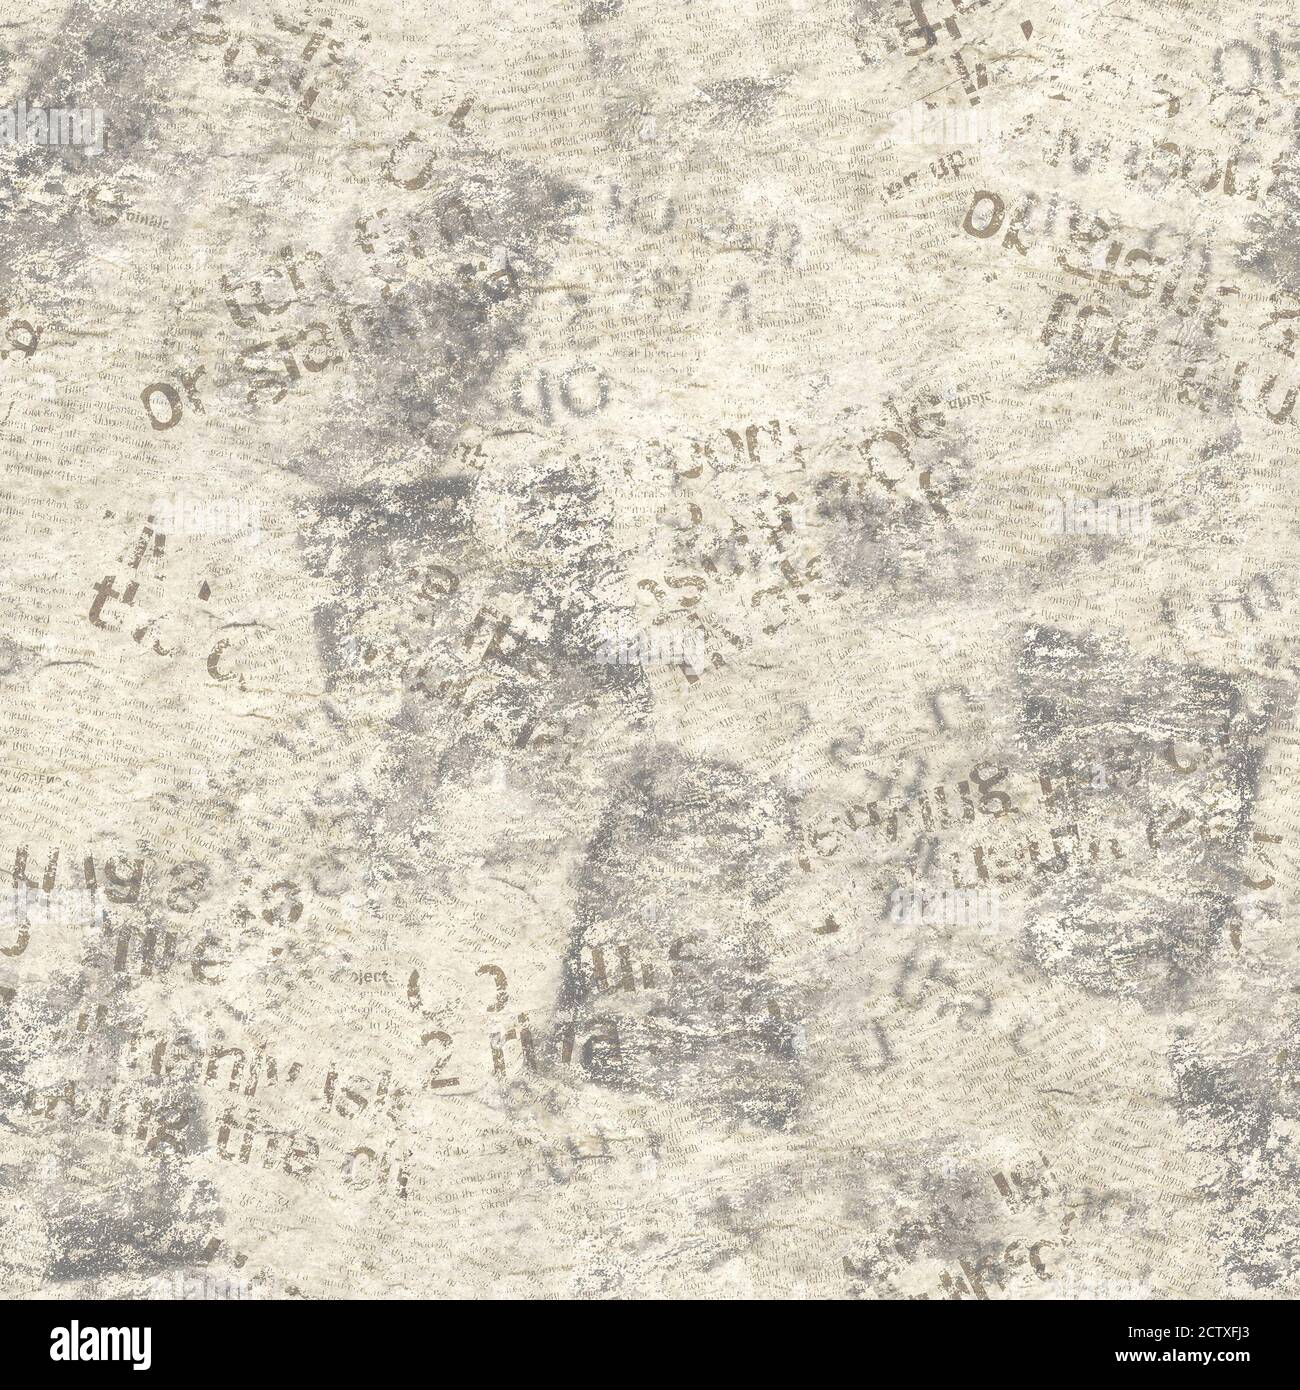 Old Grunge Newspaper Collage Seamless Pattern Unreadable Vintage Newsprint Texture Gray Color Collage News Paper Textured Background Print For Text Stock Photo Alamy